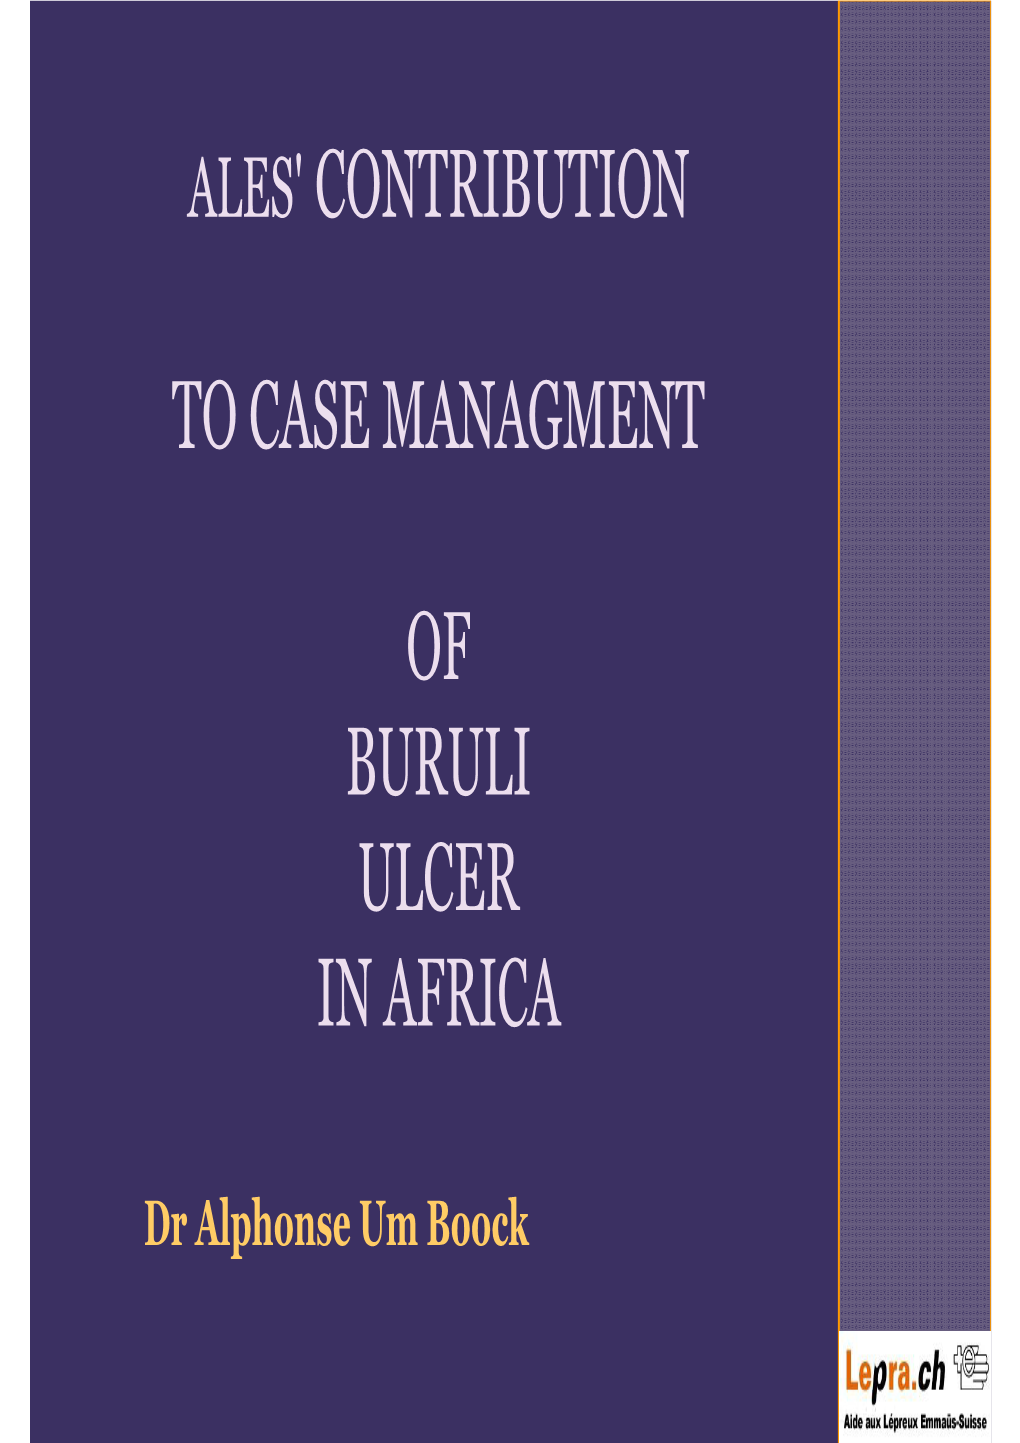 Ales' Contribution to Case Managment of Buruli Ulcer